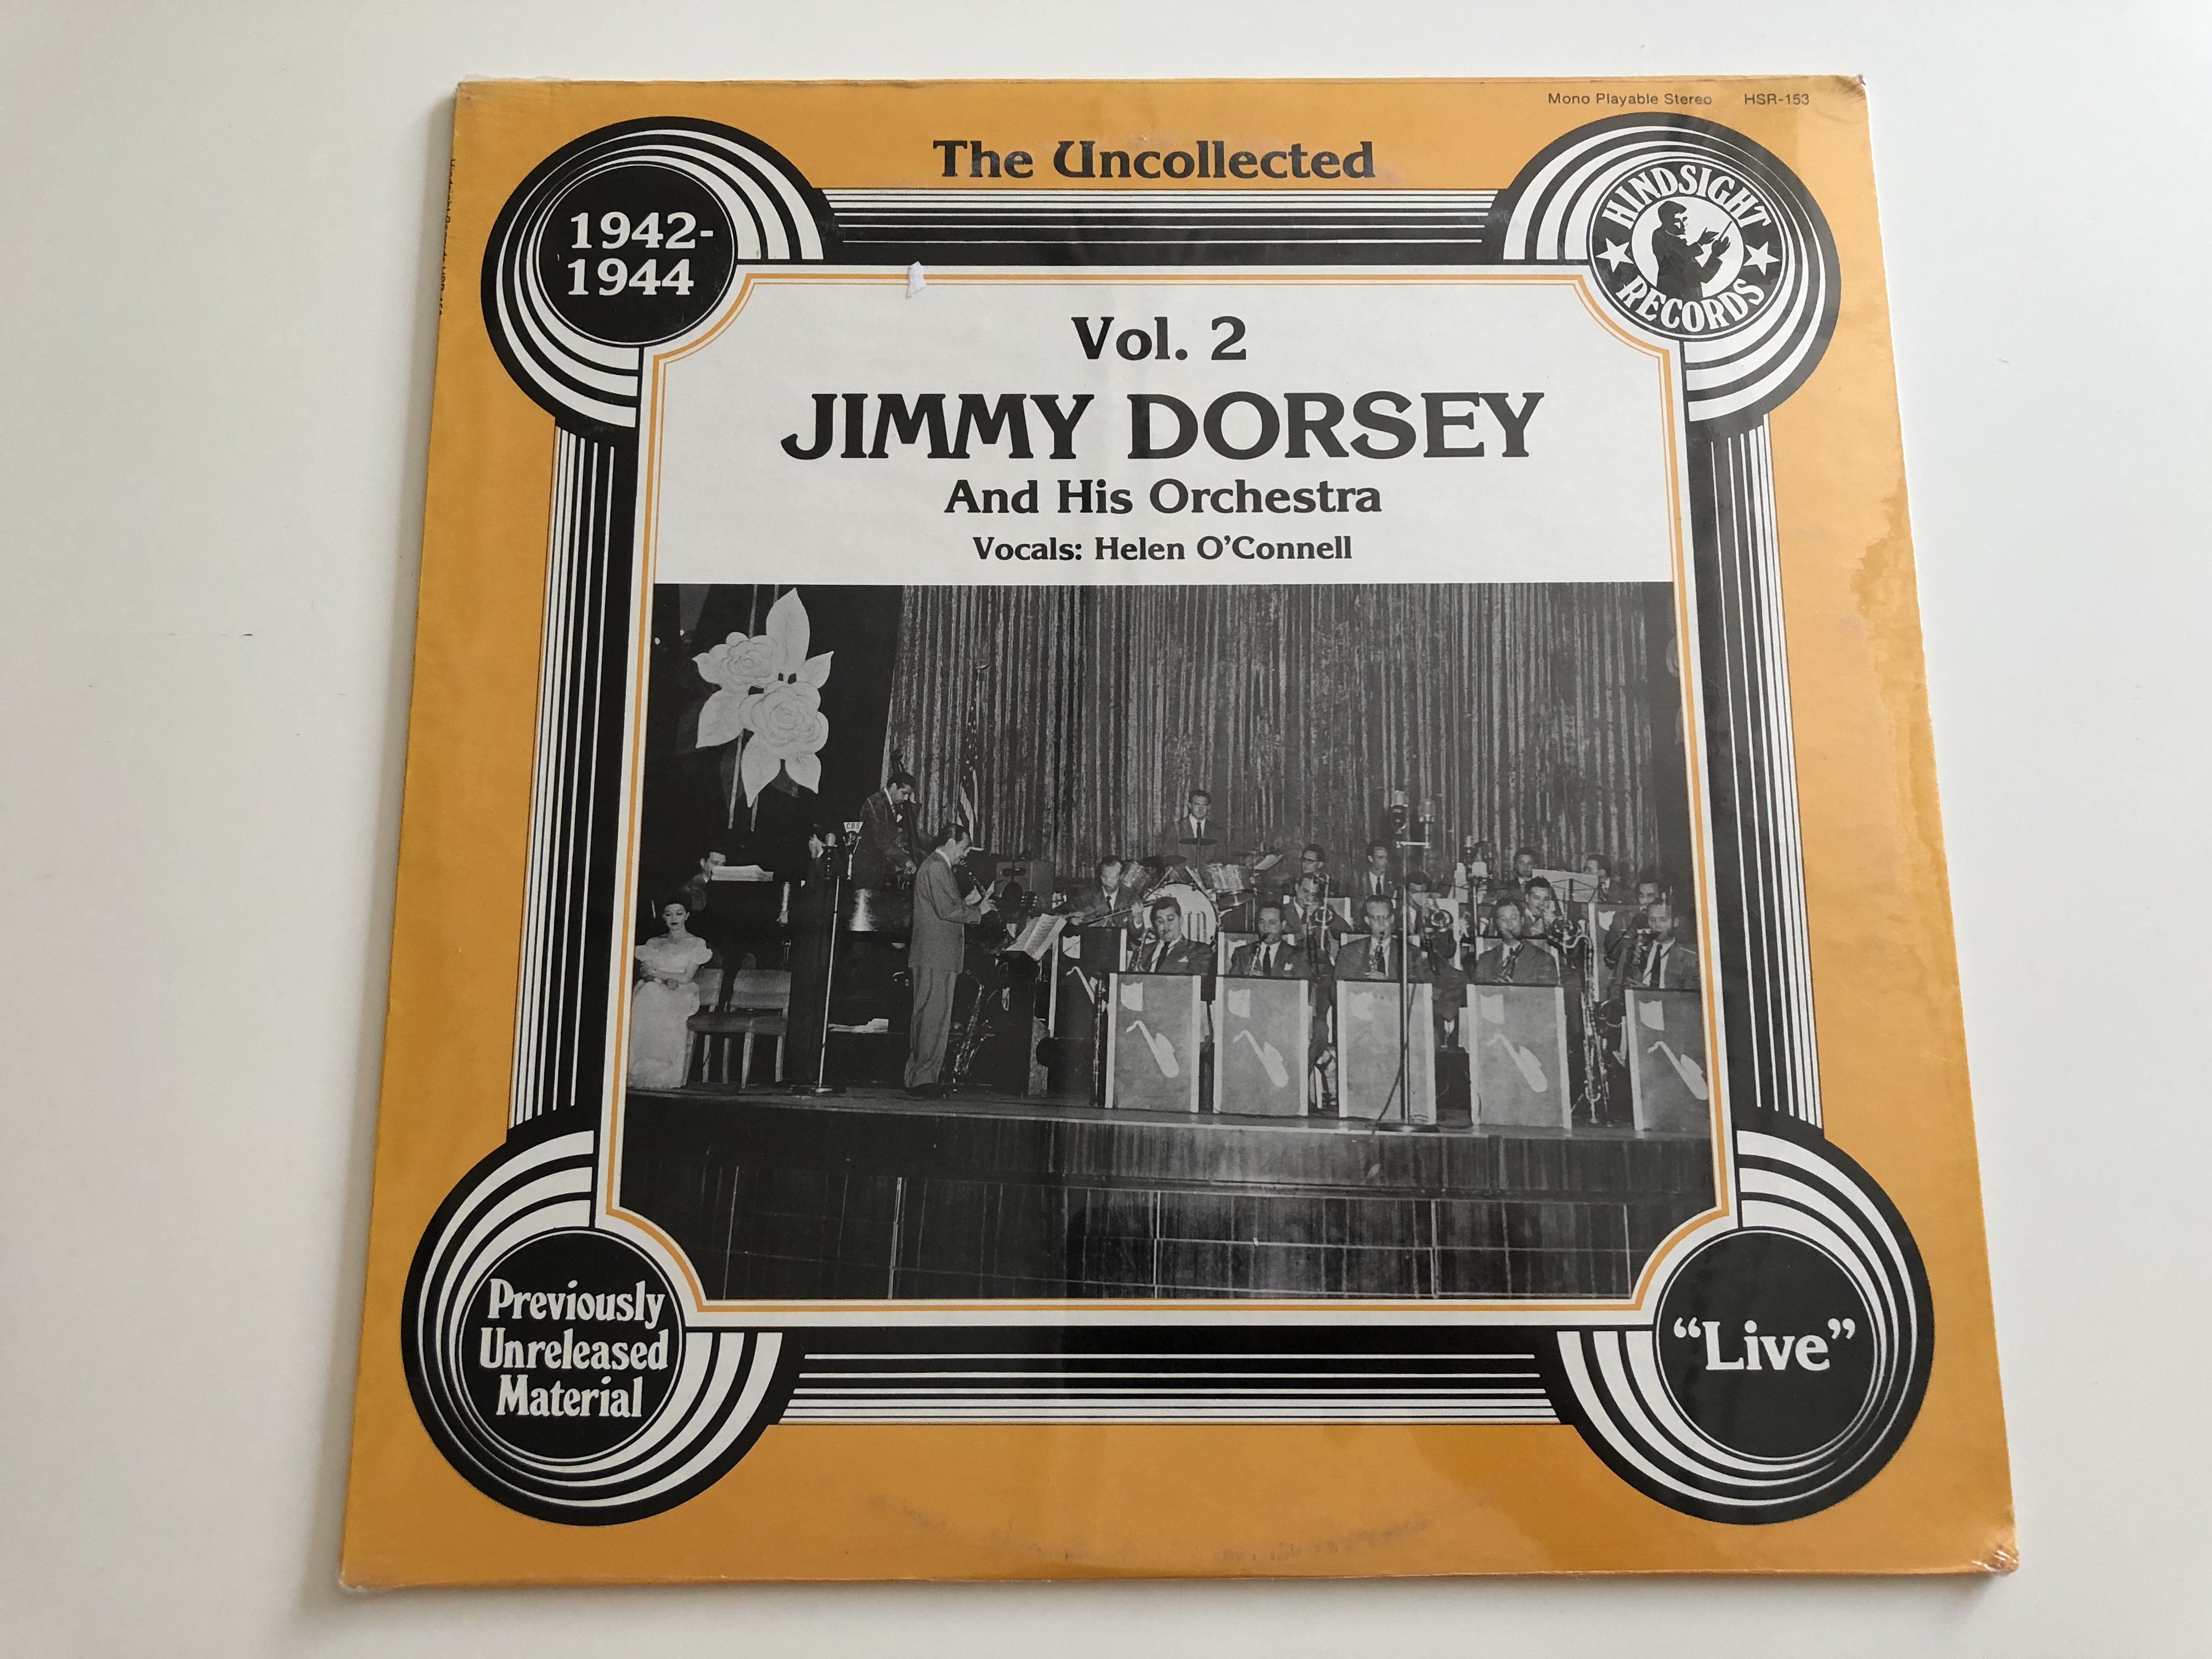 jimmy-dorsey-and-his-orchestra-vol.-2-1942-1944-live-hindsight-records-lp-hsr-153-1-.jpg